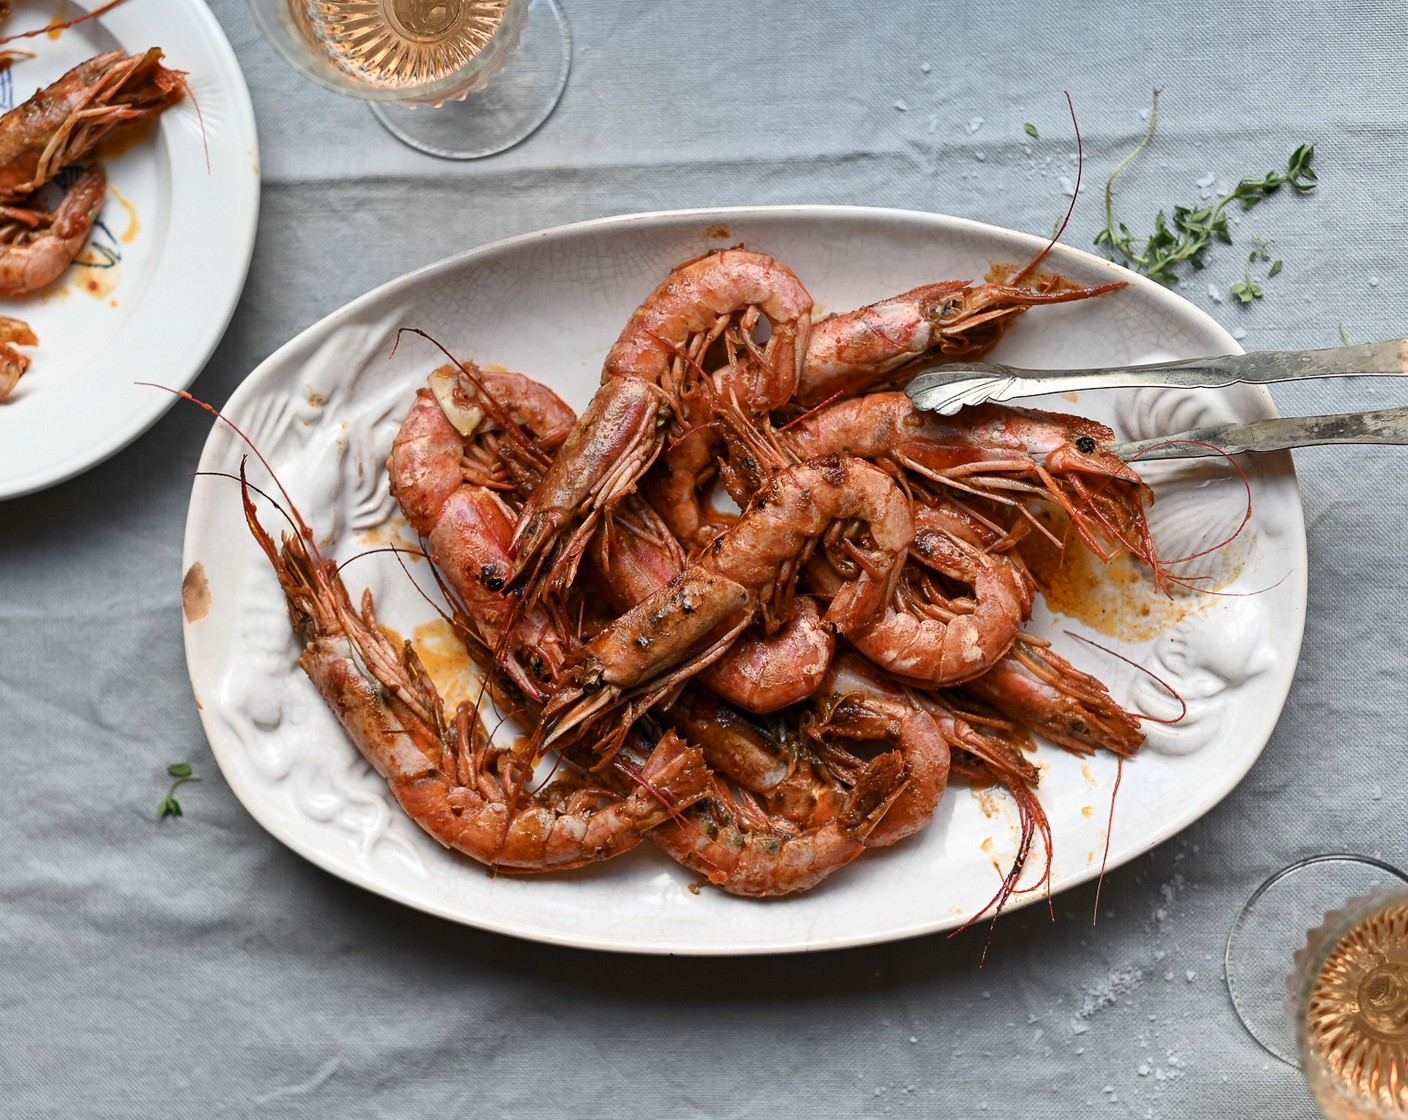 Grilled Prawns with Chili